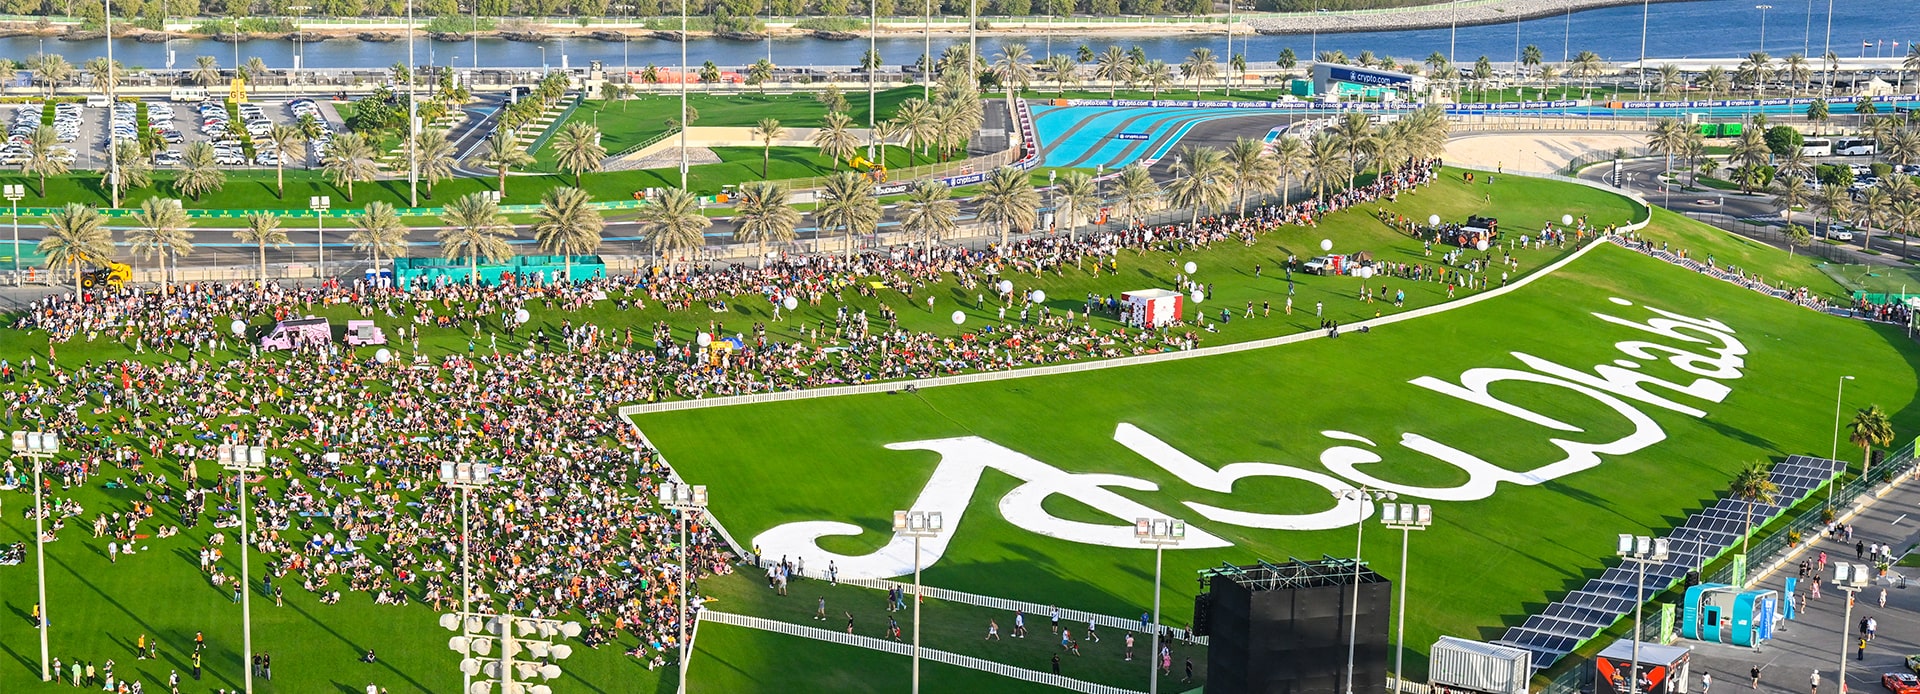 View of car racing past from Abu Dhabi Hill during the F1 Abu Dhabi Grand Prix. 